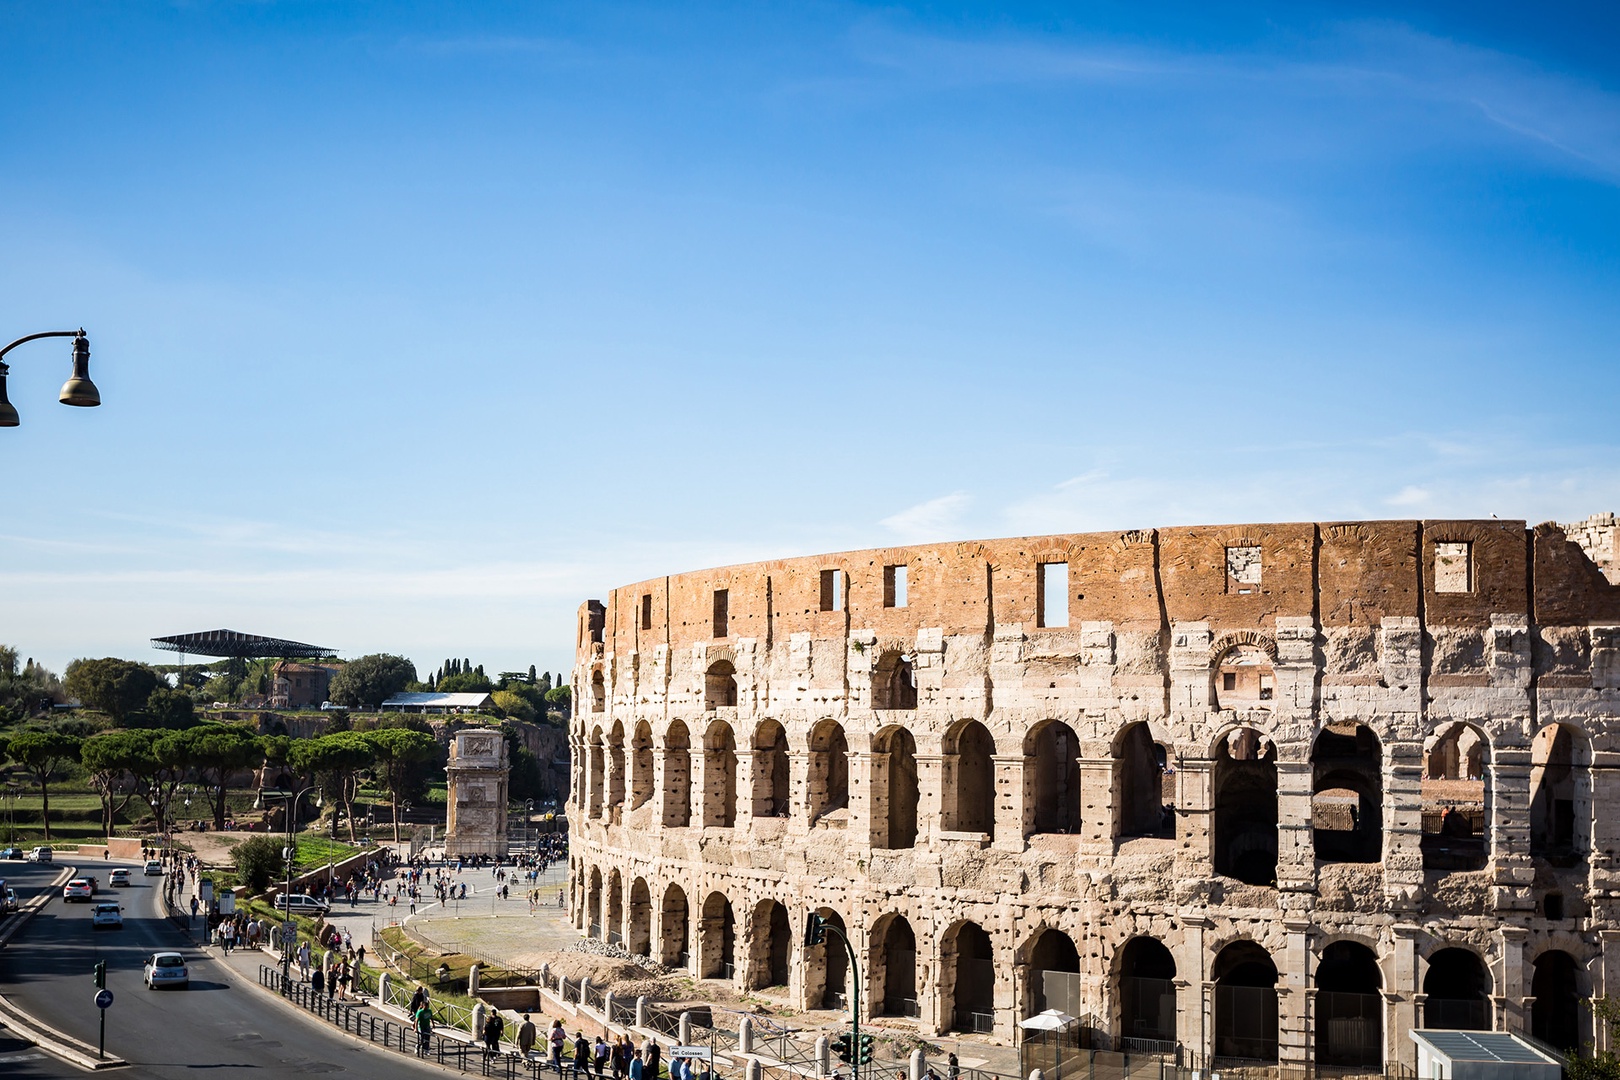 The vista of a lifetime...the icon of the ancient Rome, the Coliseum right on your doorstep!